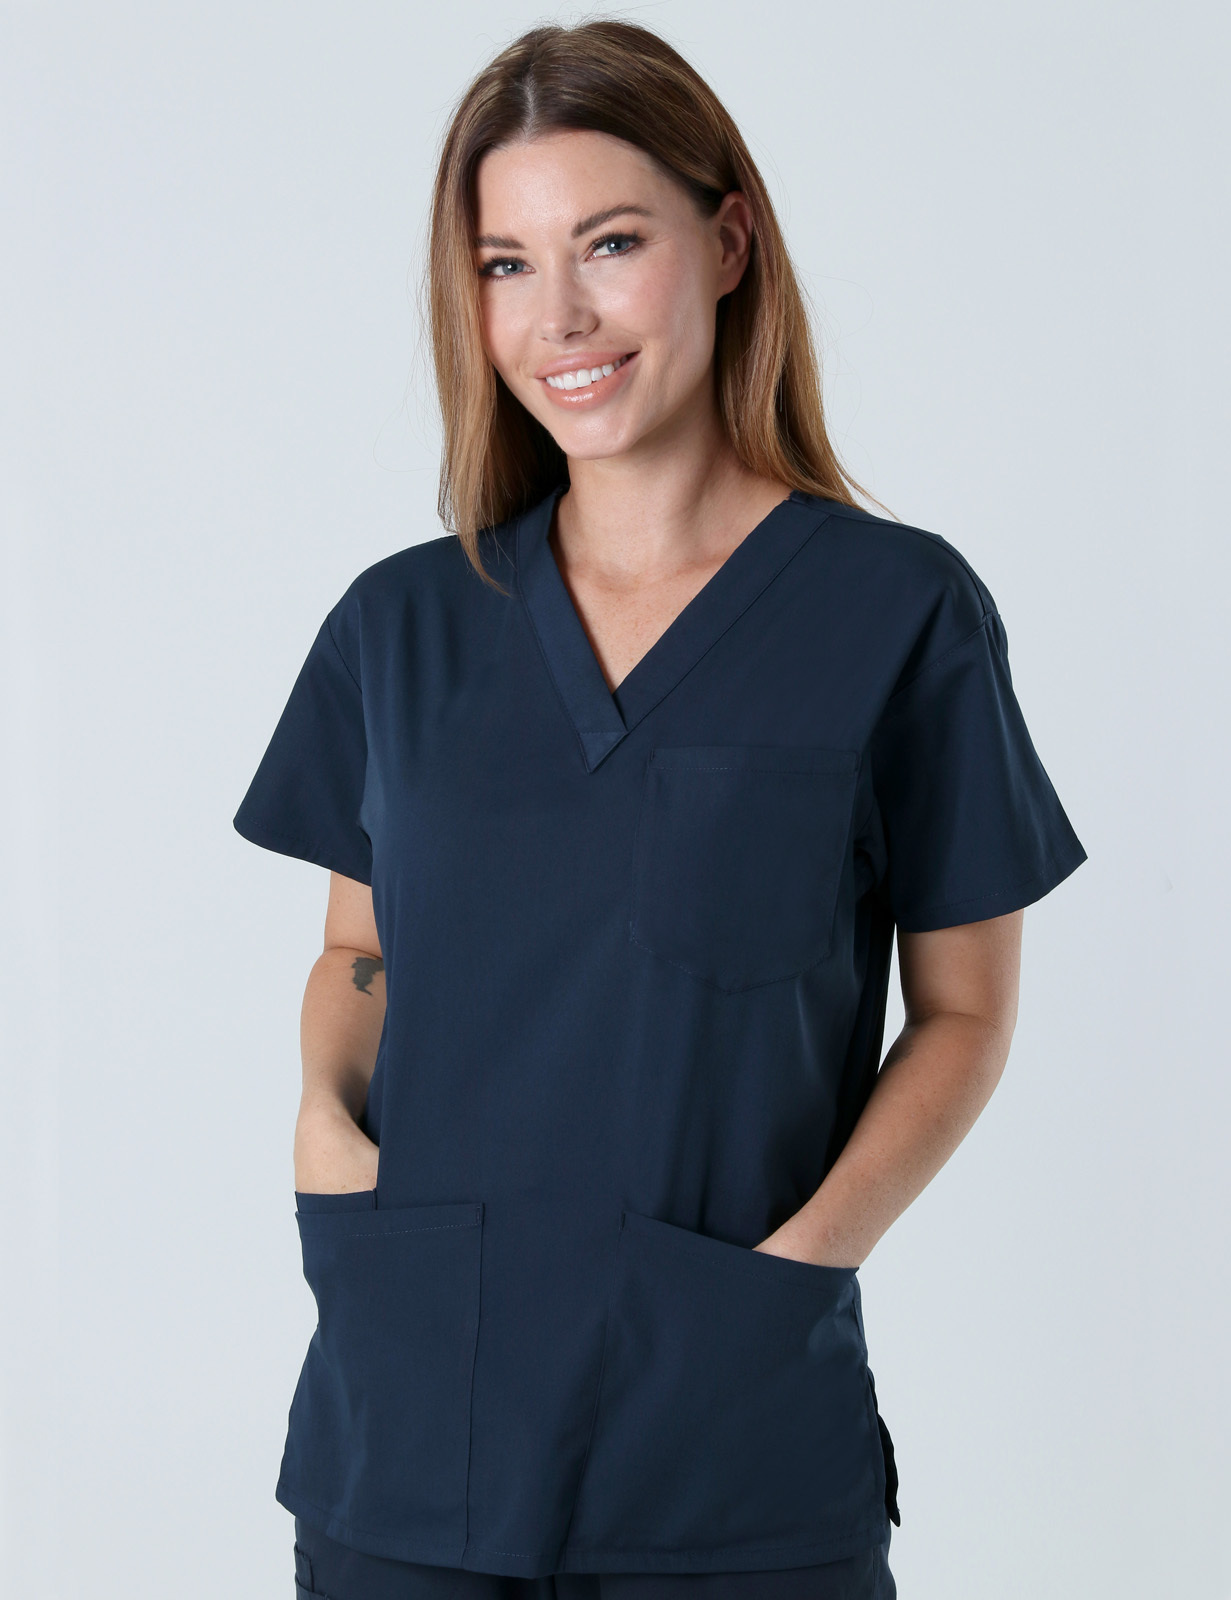 Western Private Hospital Surgical Ward Uniform Set Bundle ( 4 Pocket Top and Cargo Pants in Navy incl Logo)